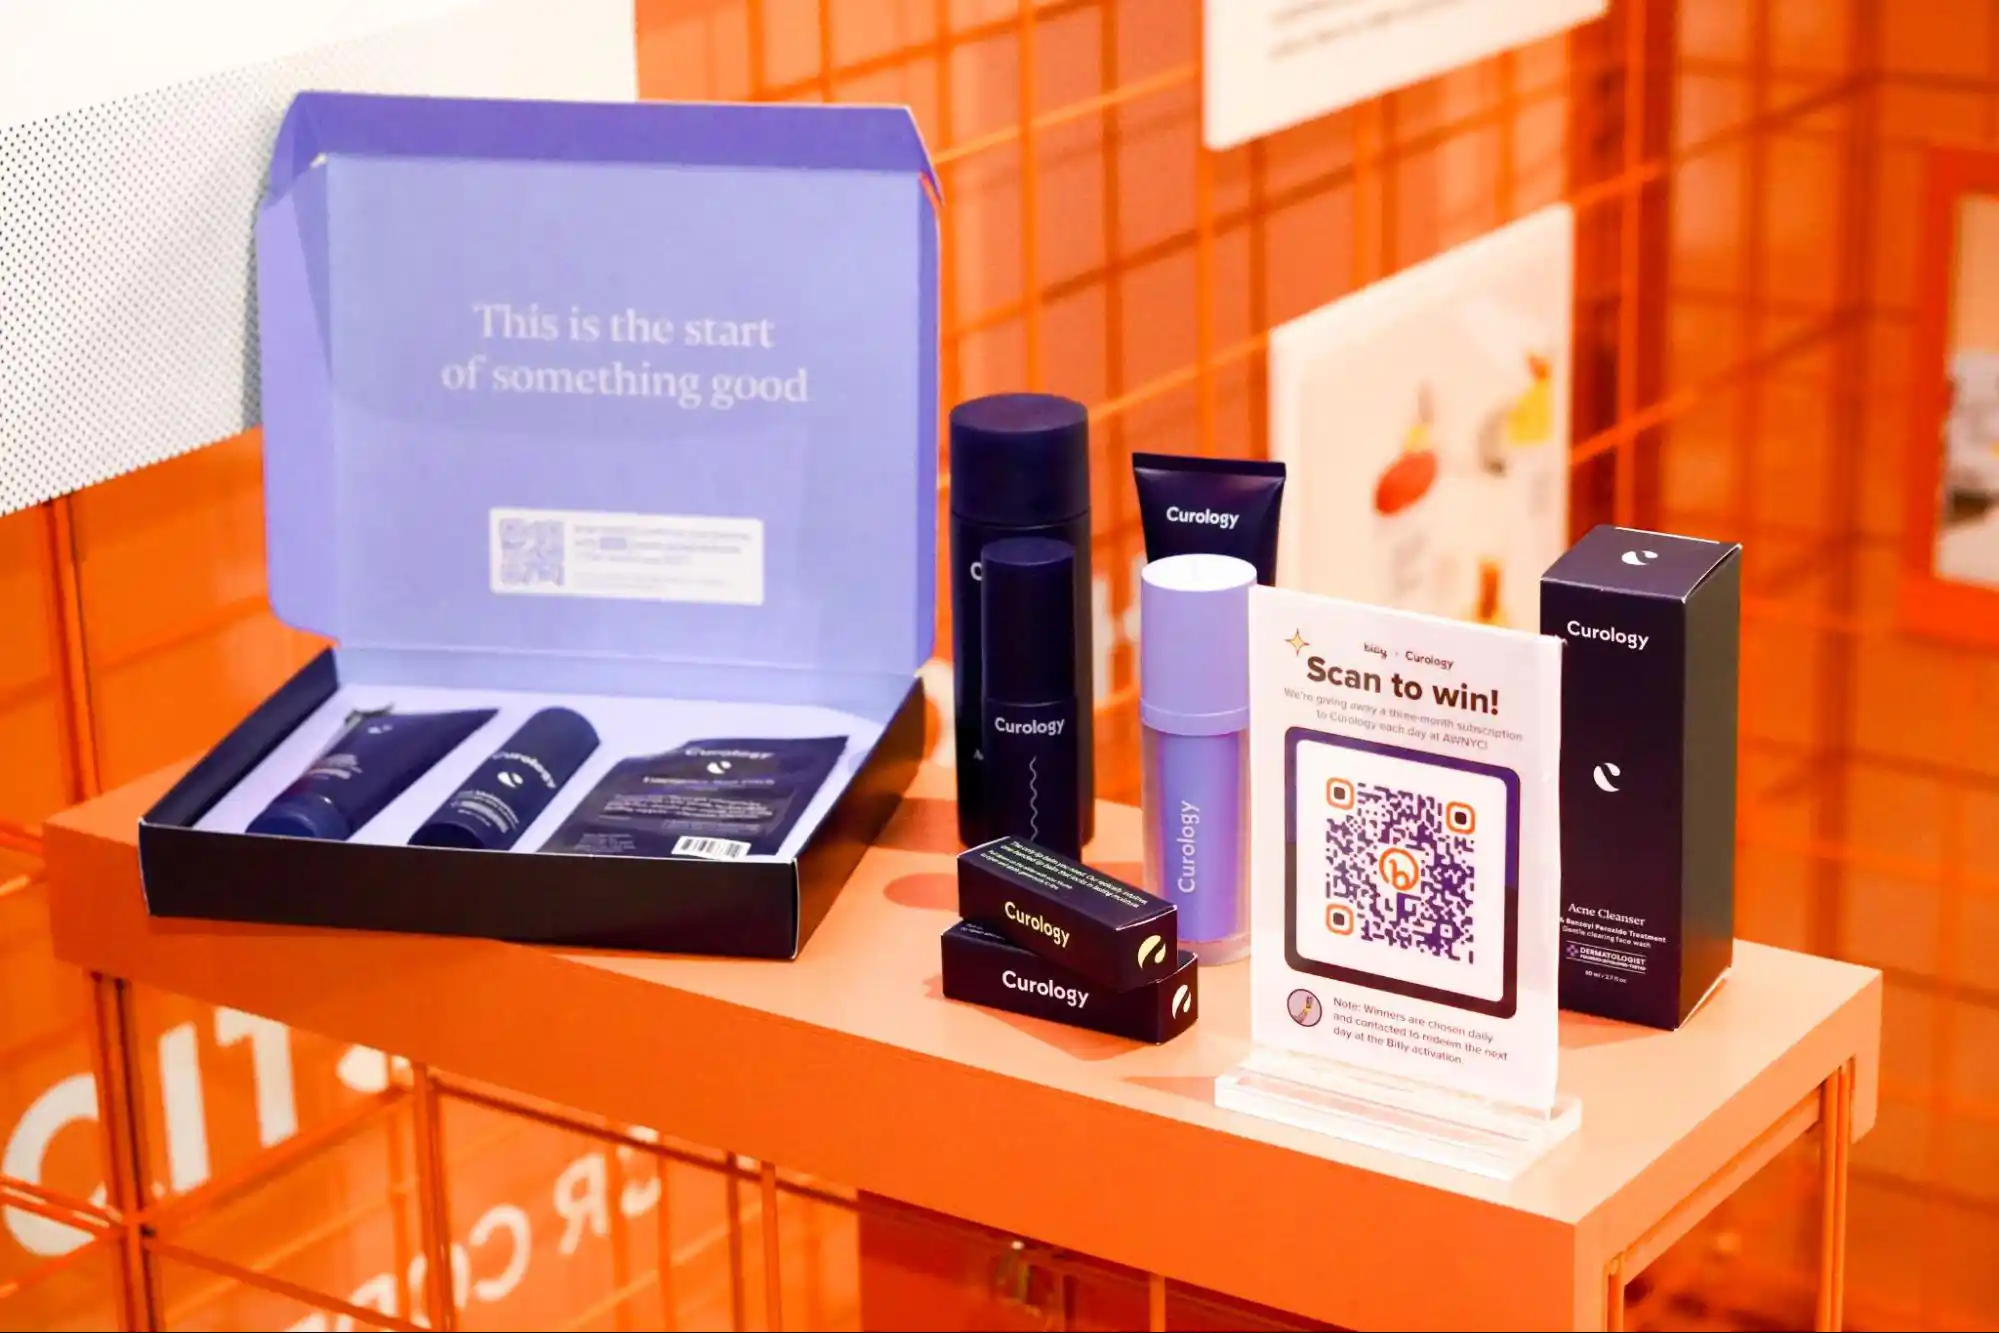 Display of Curology's skincare products at Bitly's booth at Advertising Week 2023 featuring a QR Code